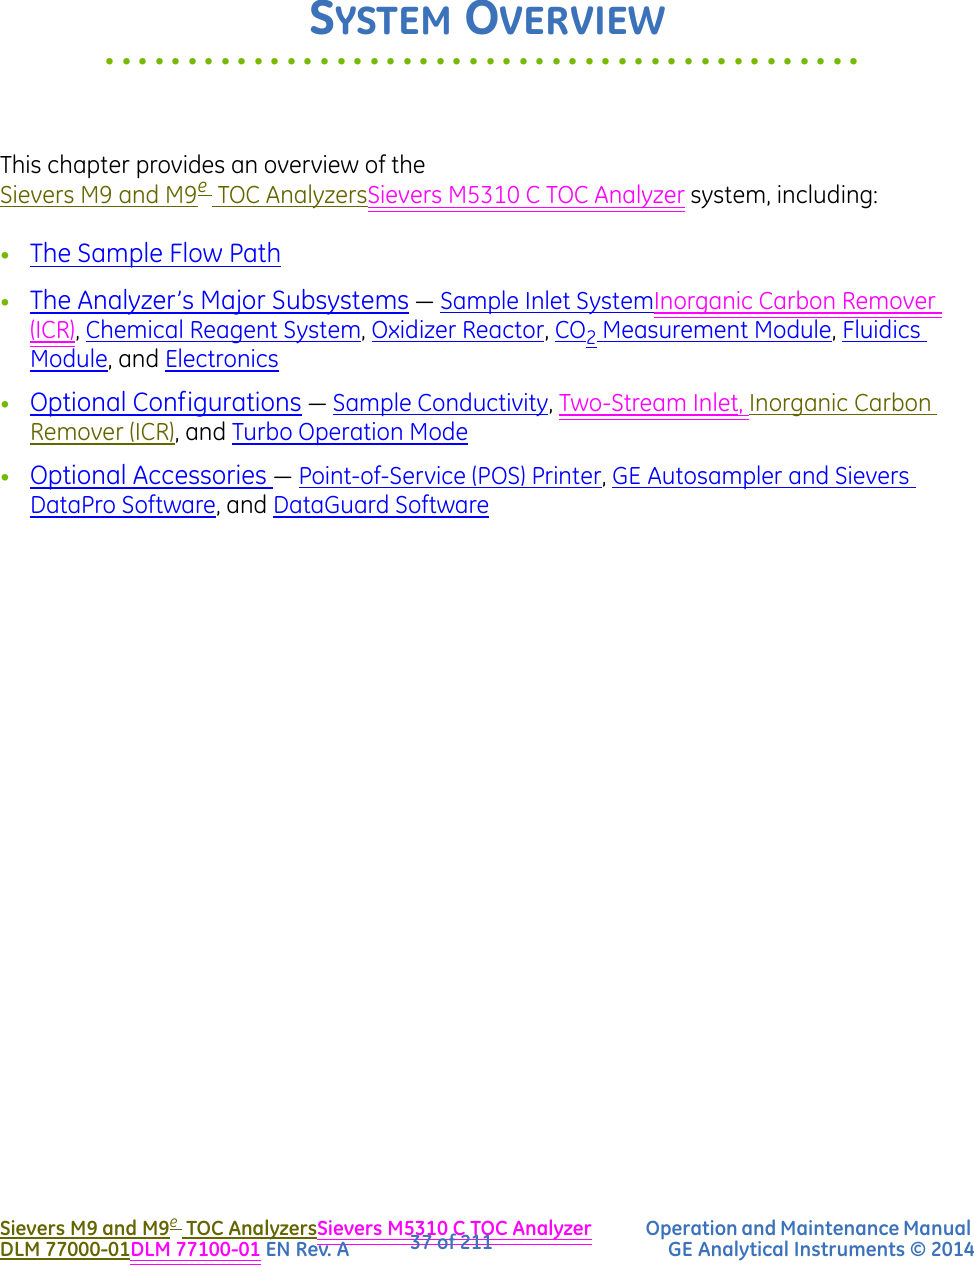 3..............................................Sievers M9 and M9eTOC AnalyzersSievers M5310 C TOC Analyzer Operation and Maintenance Manual DLM 77000-01DLM 77100-01 EN Rev. A GE Analytical Instruments © 201437 of 211SYSTEM OVERVIEWThis chapter provides an overview of the Sievers M9 and M9eTOC AnalyzersSievers M5310 C TOC Analyzer system, including:•The Sample Flow Path•The Analyzer’s Major Subsystems — Sample Inlet SystemInorganic Carbon Remover (ICR), Chemical Reagent System, Oxidizer Reactor, CO2 Measurement Module, Fluidics Module, and Electronics•Optional Configurations — Sample Conductivity, Two-Stream Inlet, Inorganic Carbon Remover (ICR), and Turbo Operation Mode•Optional Accessories — Point-of-Service (POS) Printer, GE Autosampler and Sievers DataPro Software, and DataGuard Software